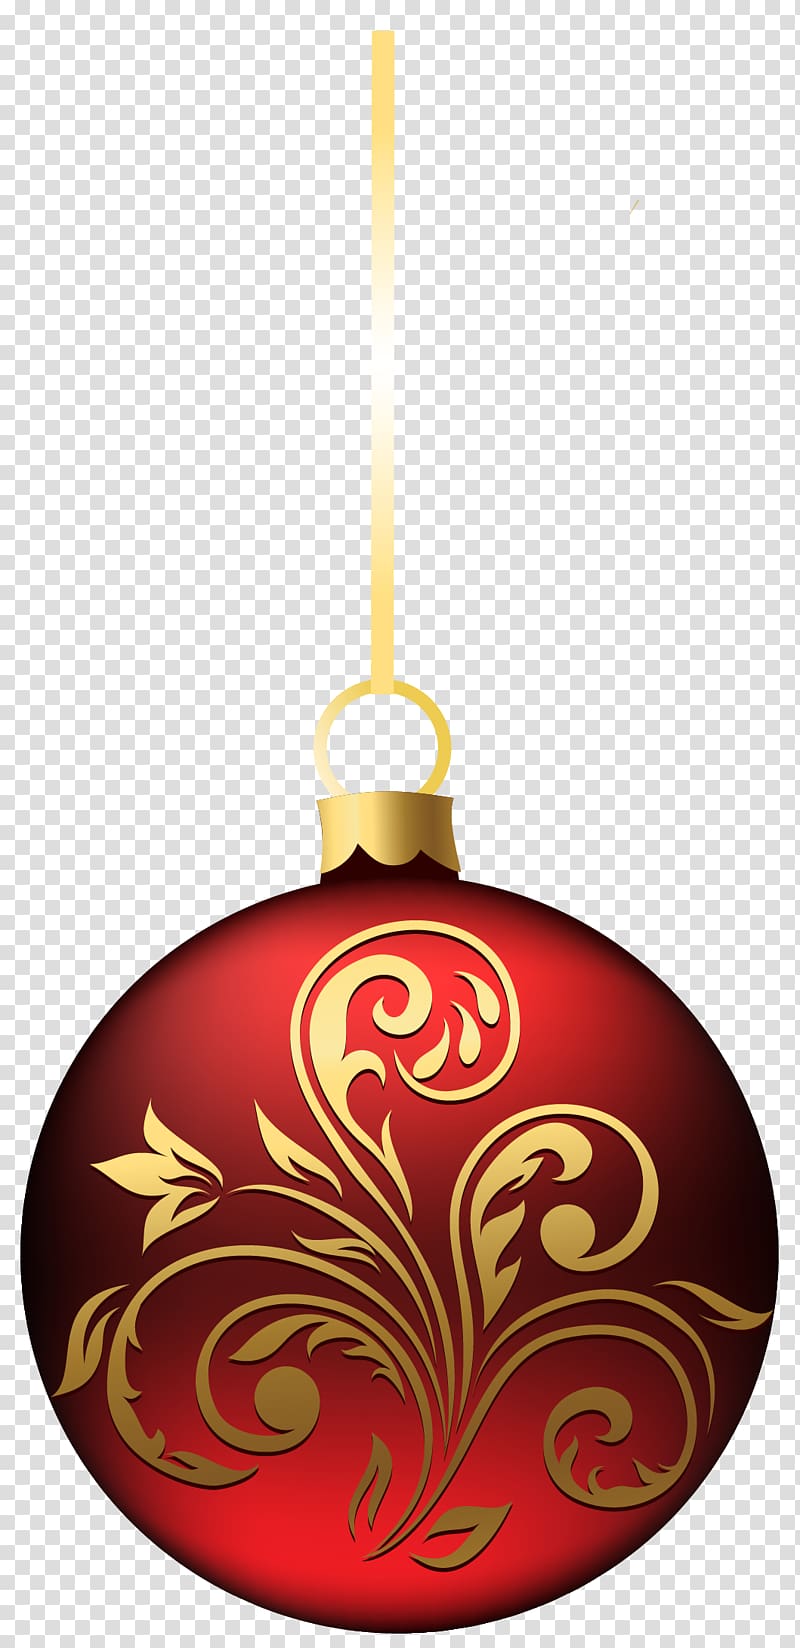 Christmas ornament Christmas decoration , Large BlueRed Christmas Ball Ornament , red and brown pendant lamp transparent background PNG clipart